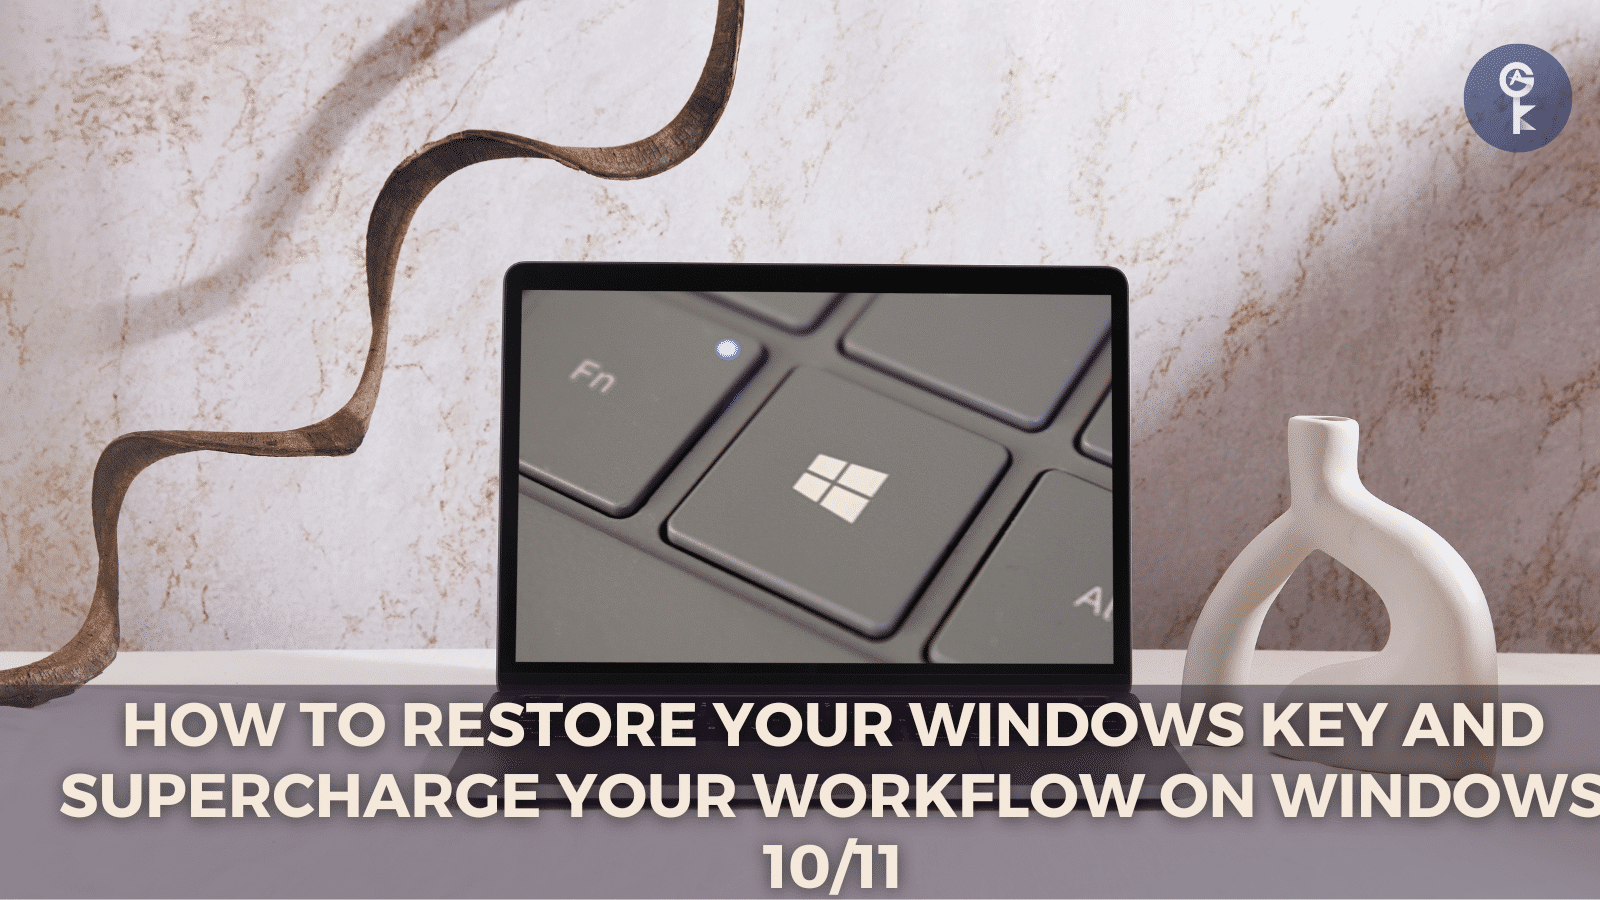 How to Restore Your Windows Key and Supercharge Your Workflow on Windows 10/11